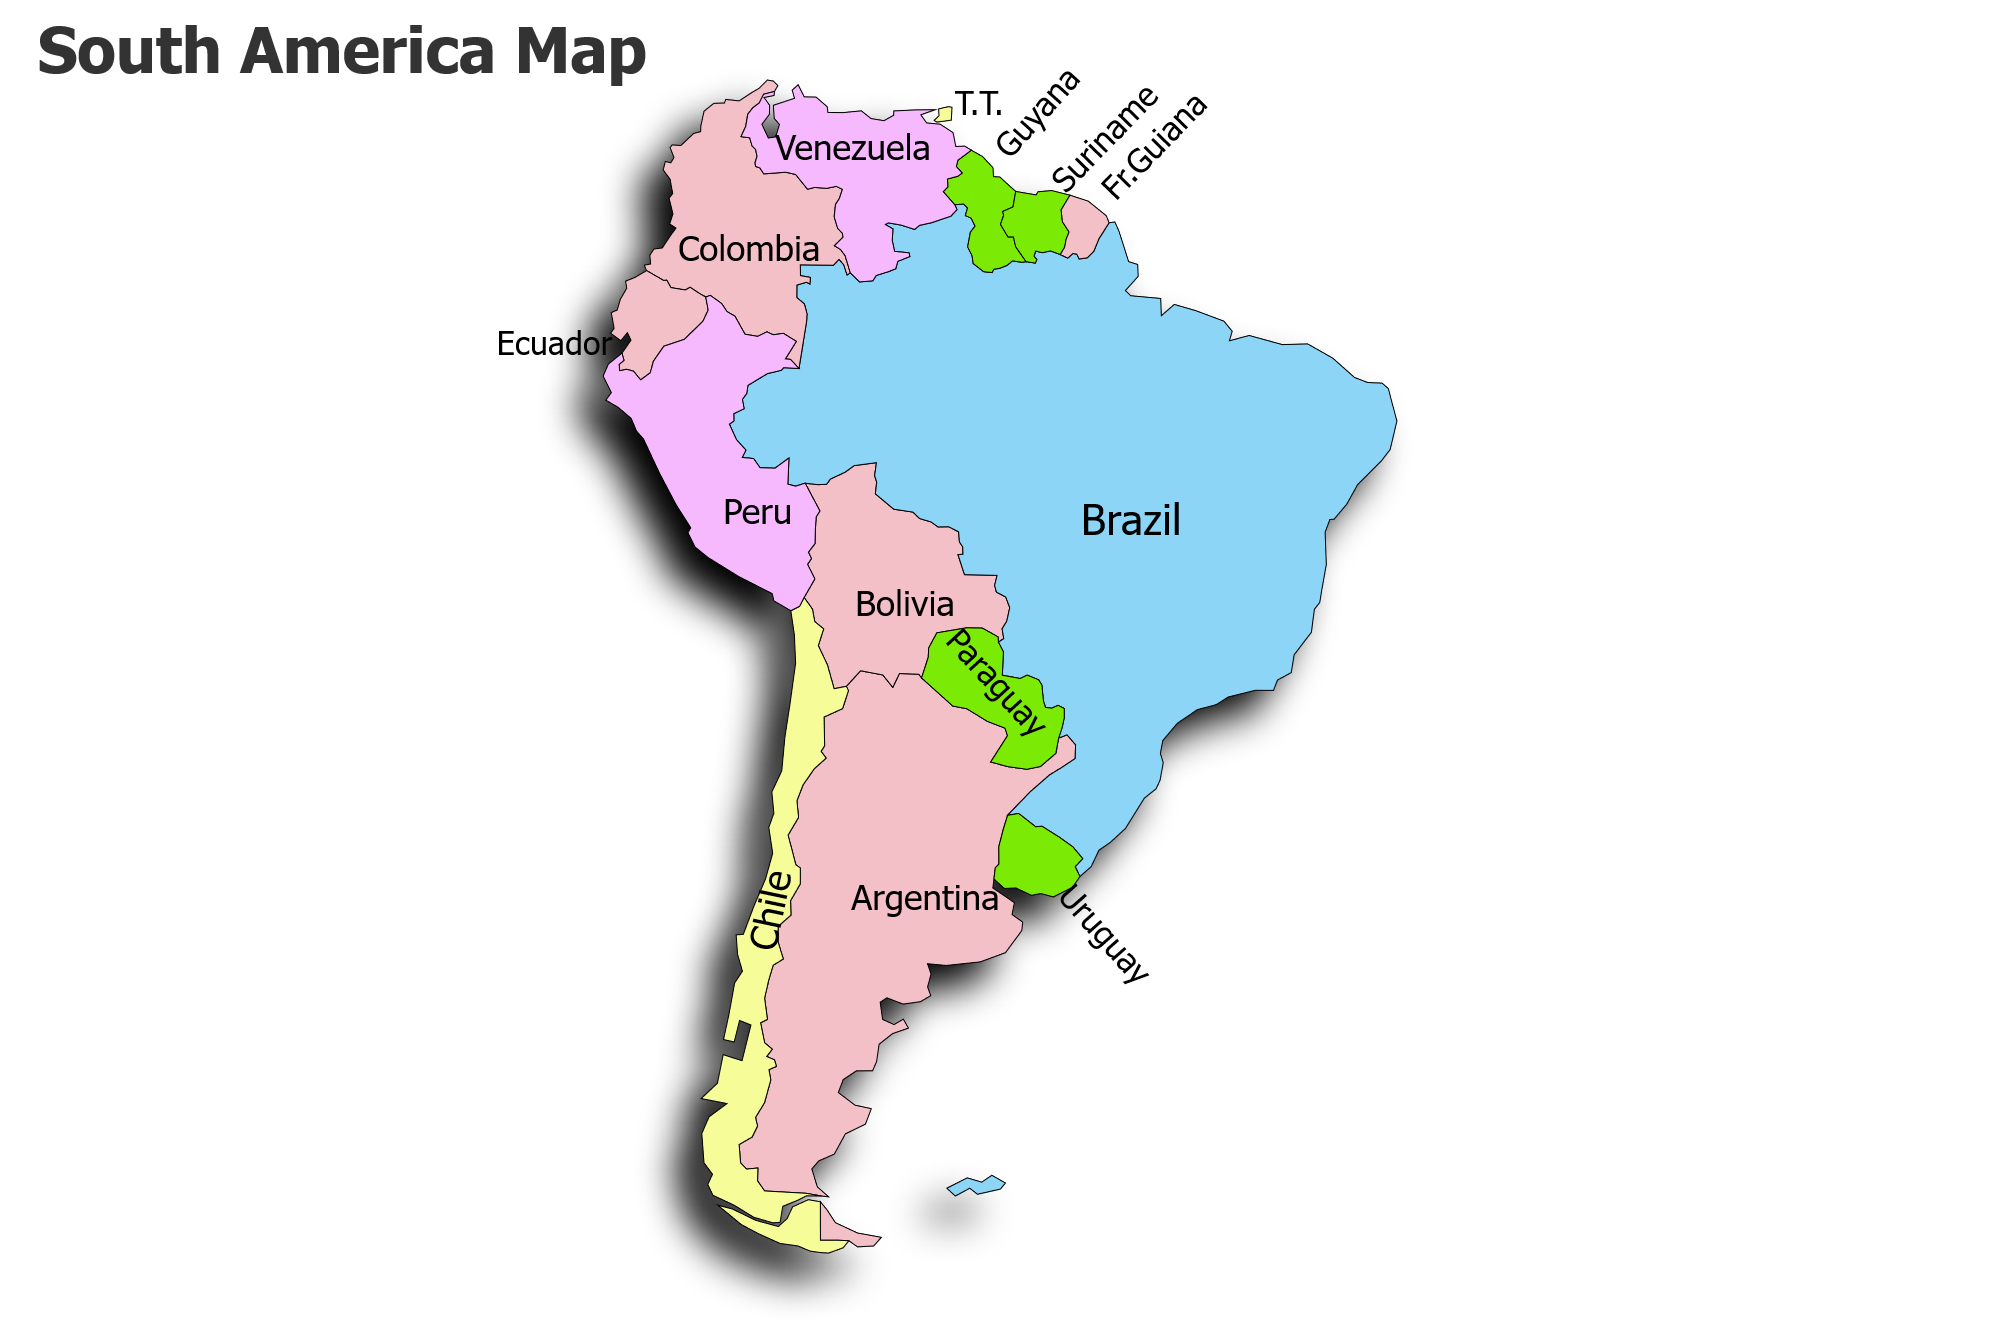 Introduction to Introduction to worlds fourth largest continent South America